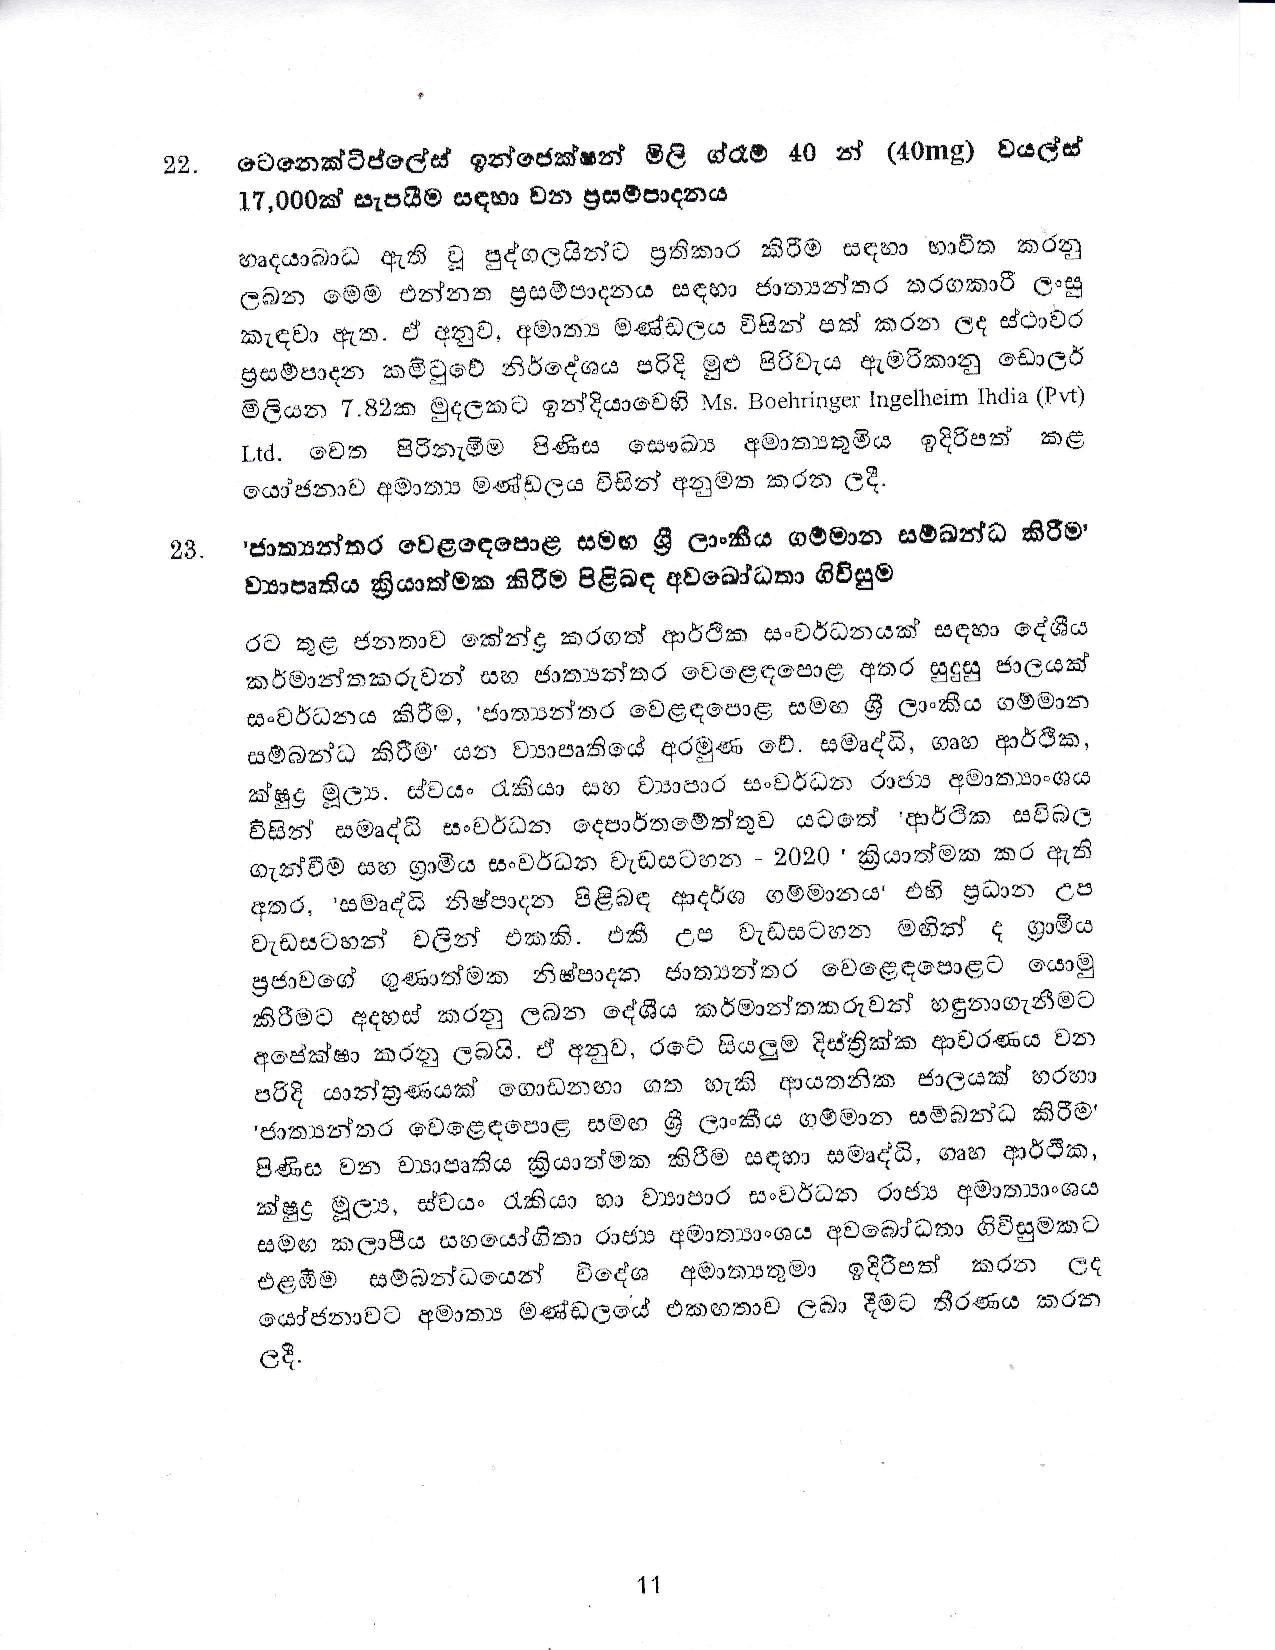 Cabinet Decision on 11.01.2021 page 011